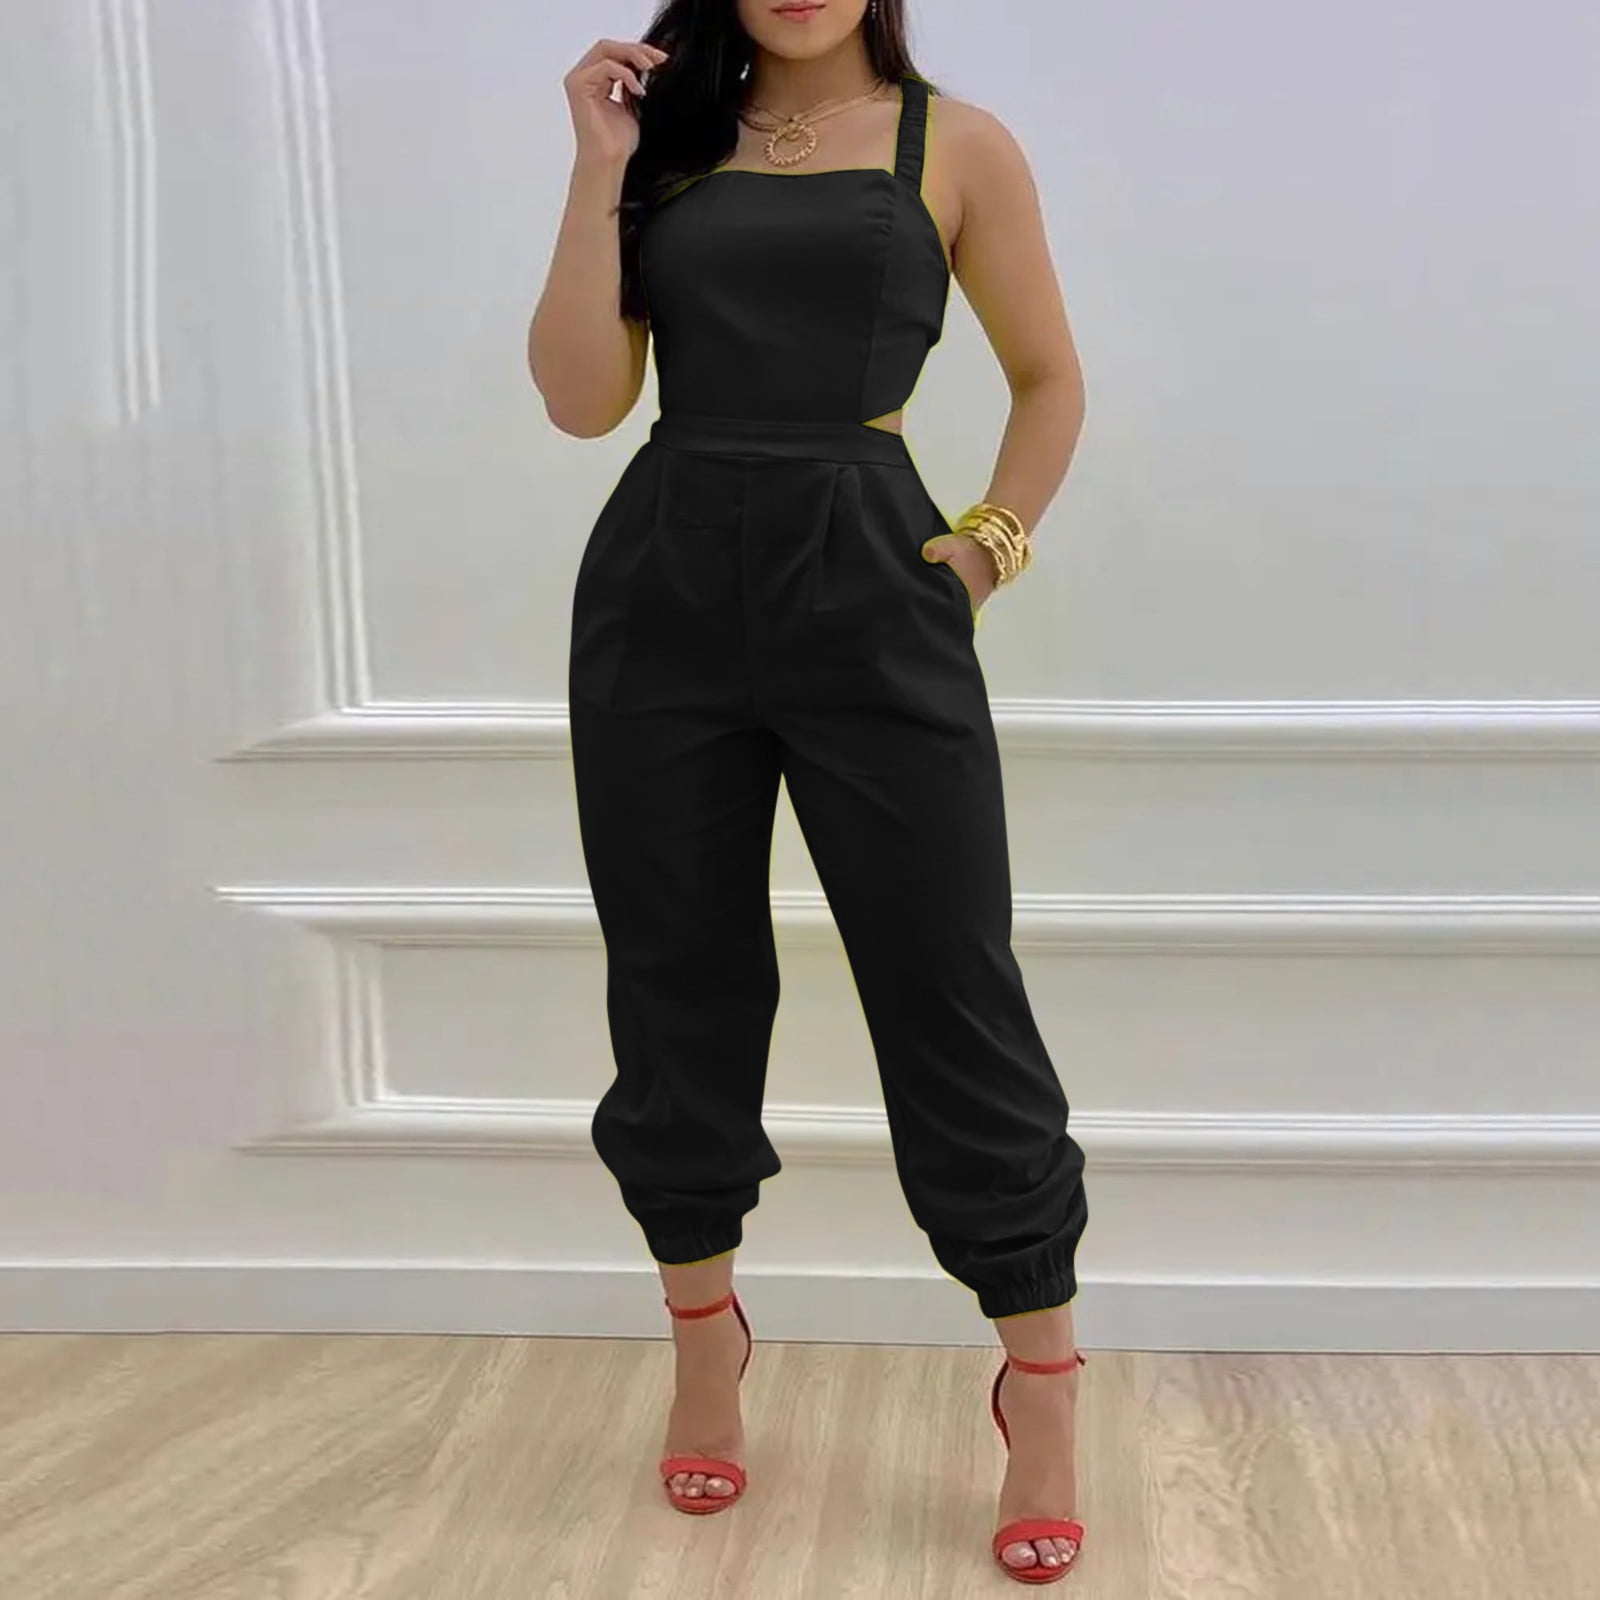 adviicd Dressy Jumpsuits For Women Evening Party Women's Bodycon Jumpsuit  Long Sleeve Zipper One Piece Romper Outfits Clubwear Grey M 